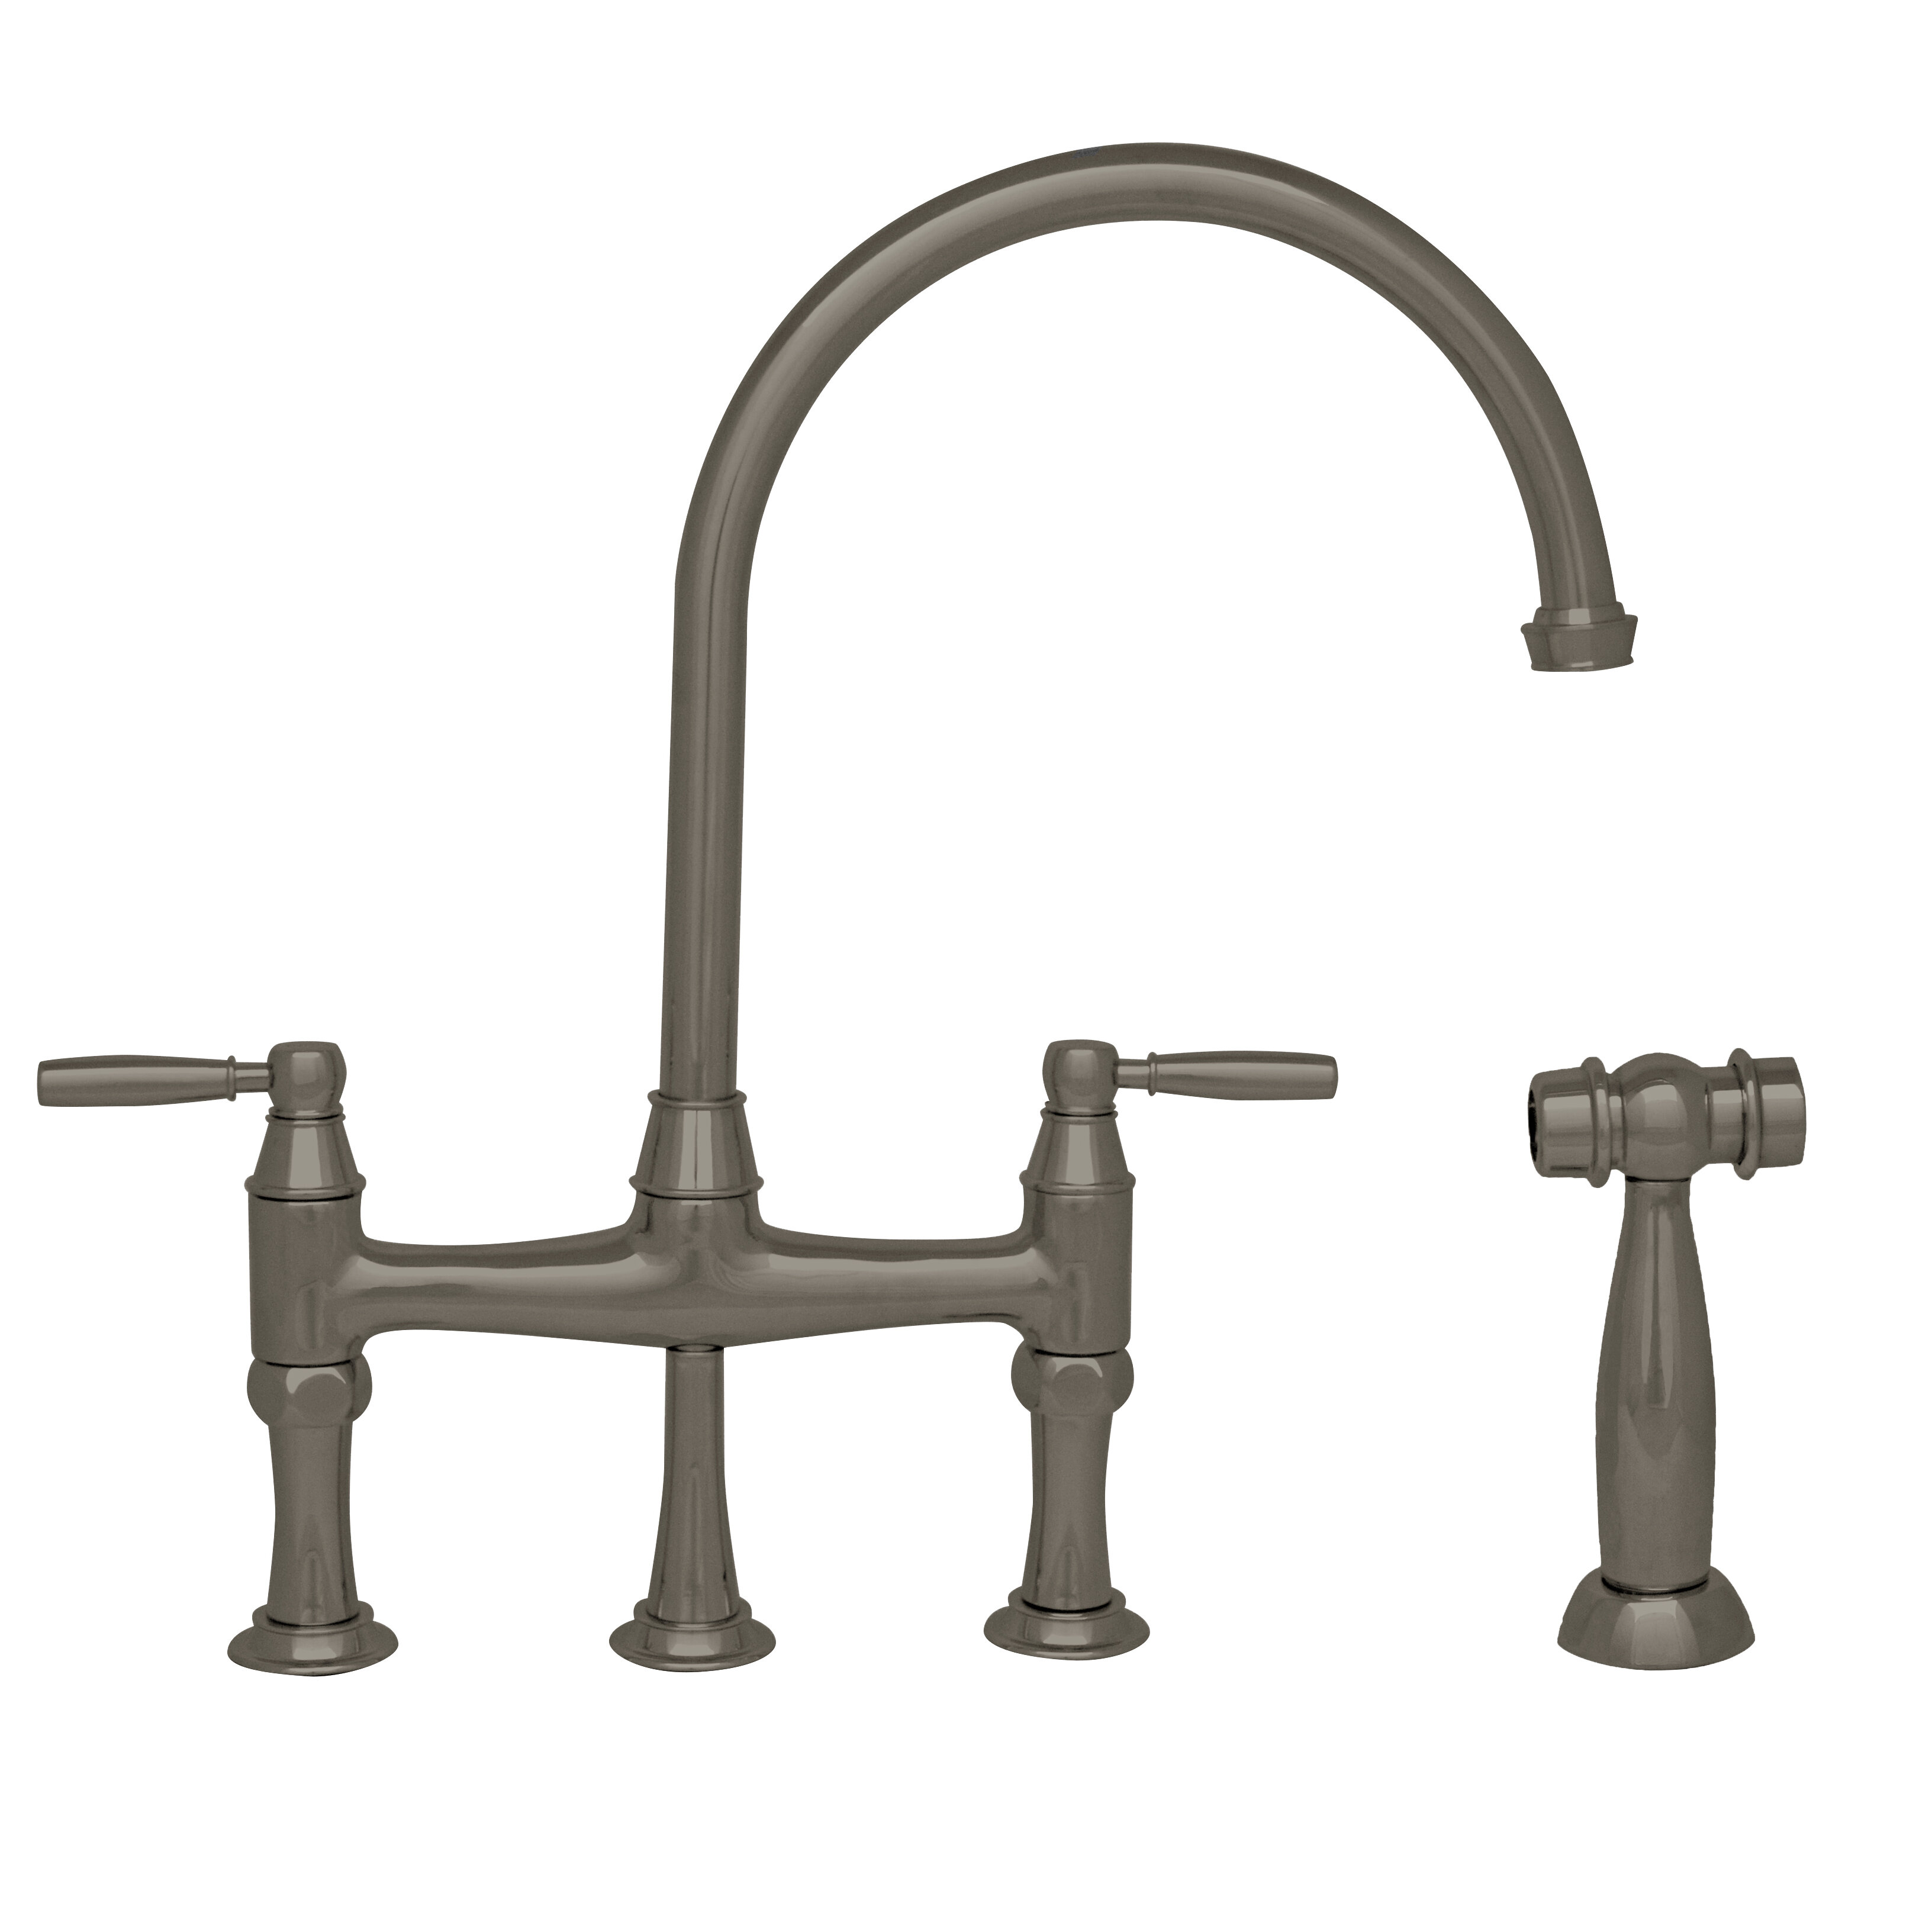 Whitehaus Collection Queenhaus Bridge Faucet With Side Spray